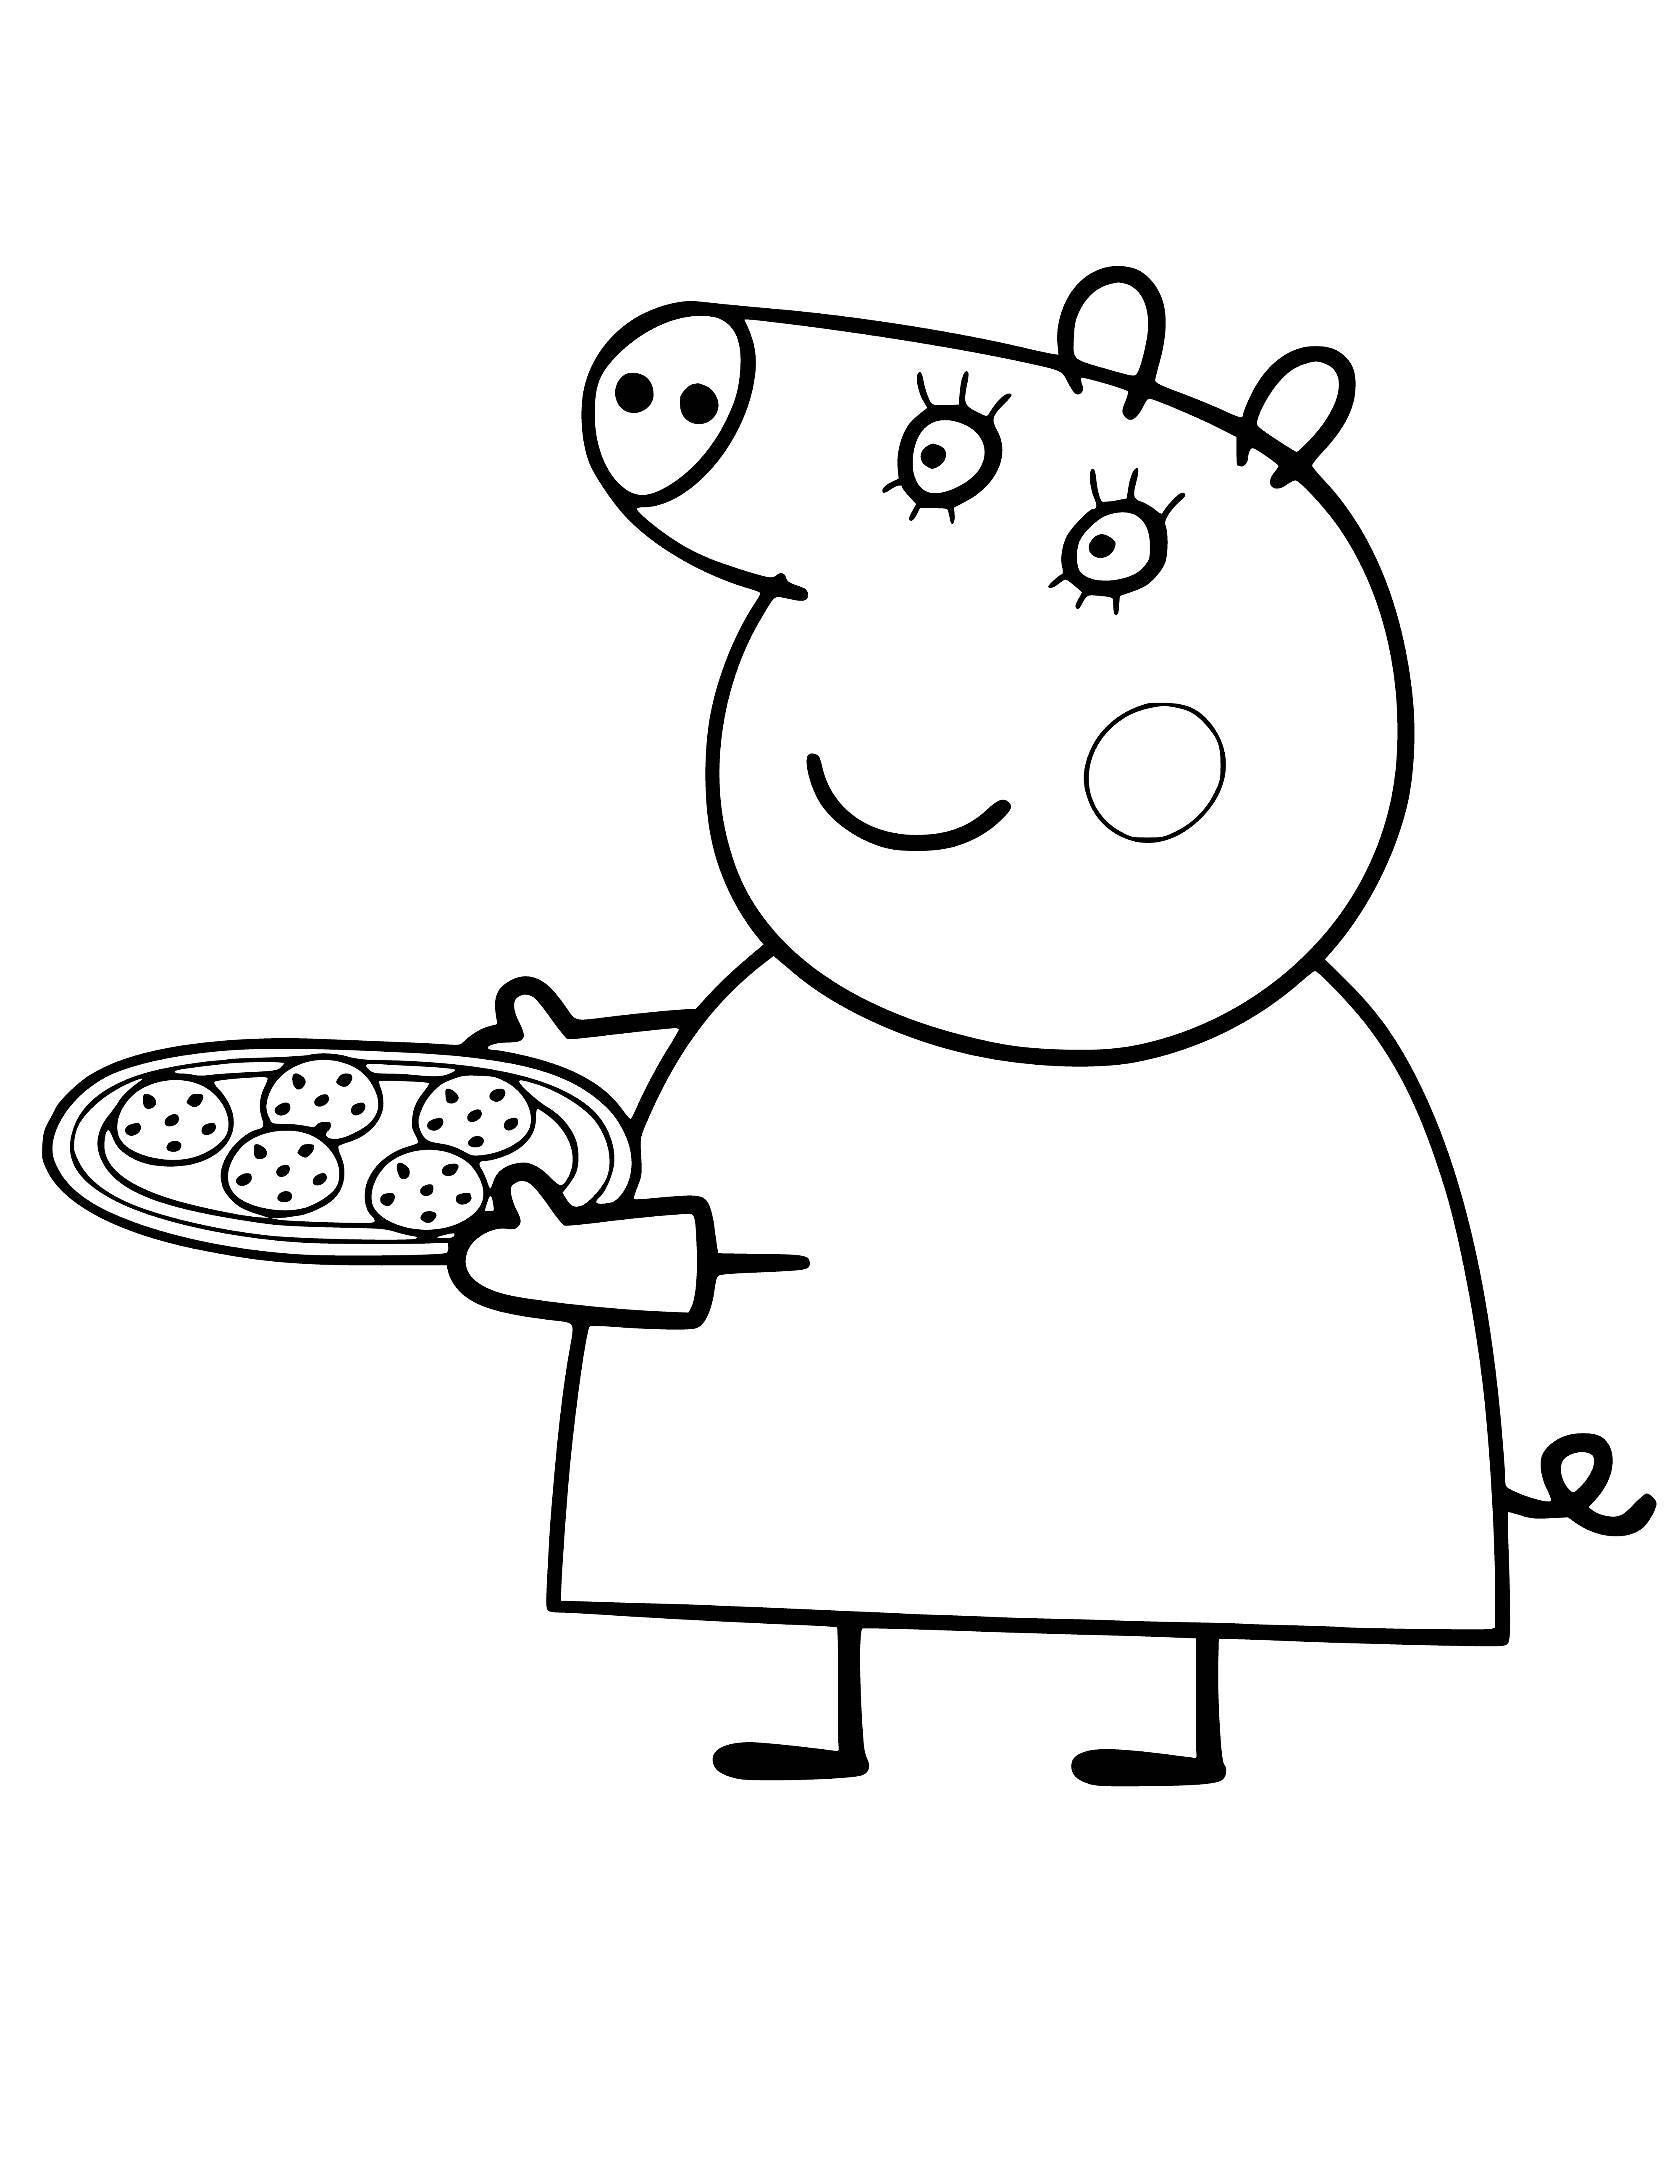 coloring page: Mother Pig is baking cookies in the hot oven, wearing an apron and holding a spatula with a smile. #smilingcooking